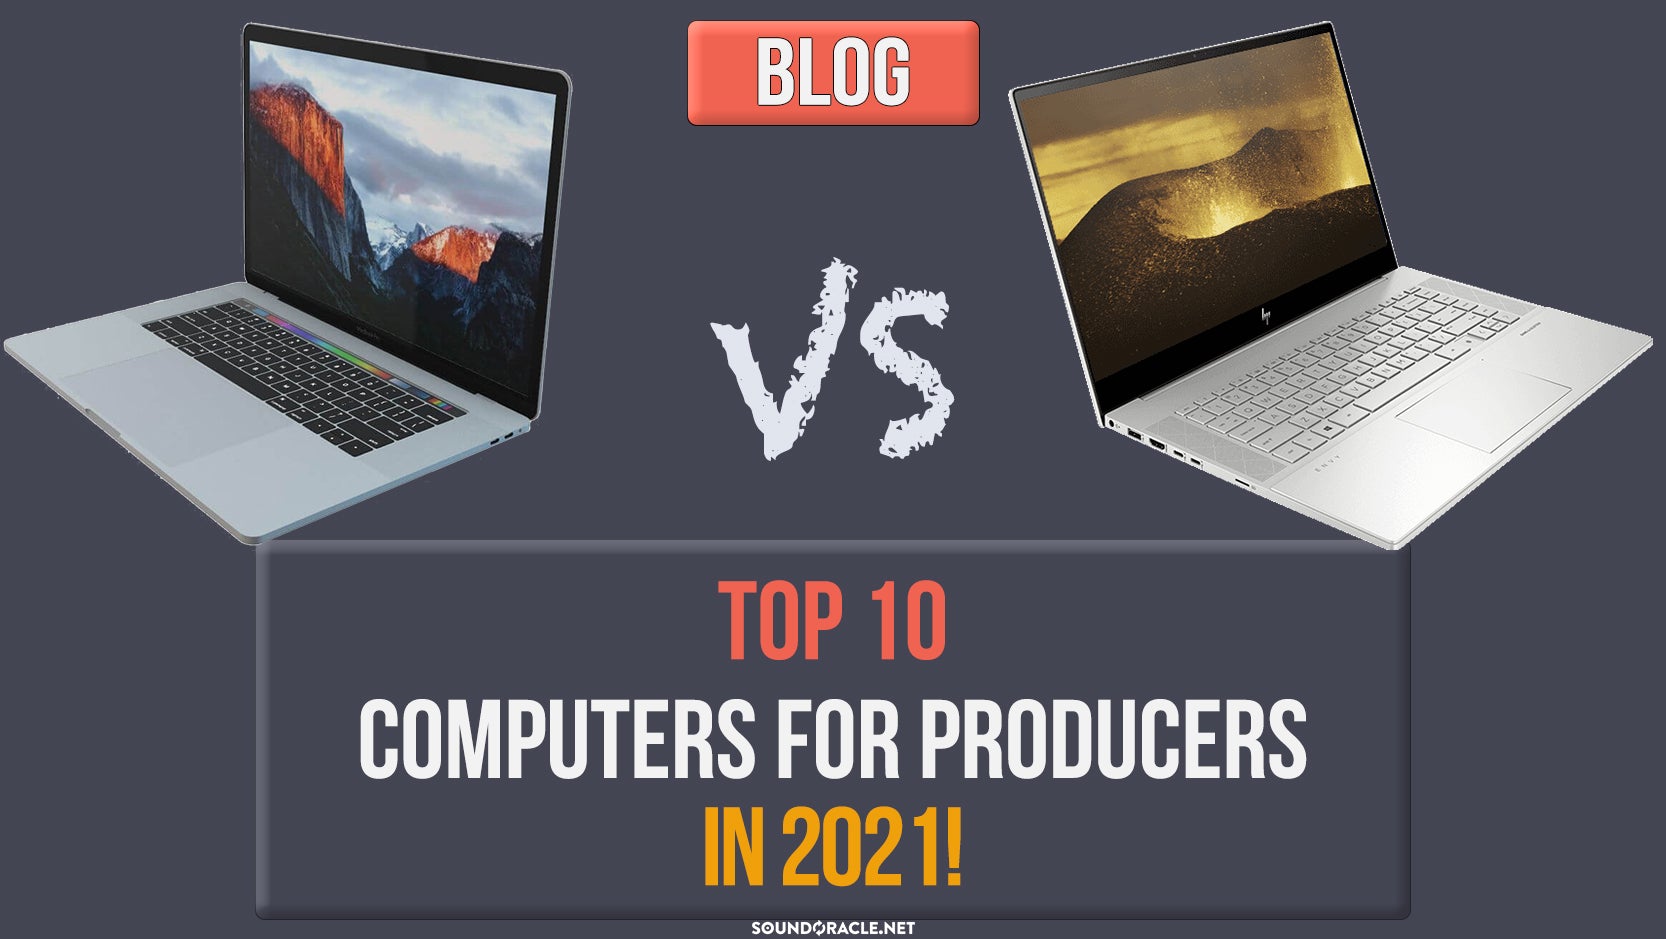 Top 10 Computers for Producers in 2021